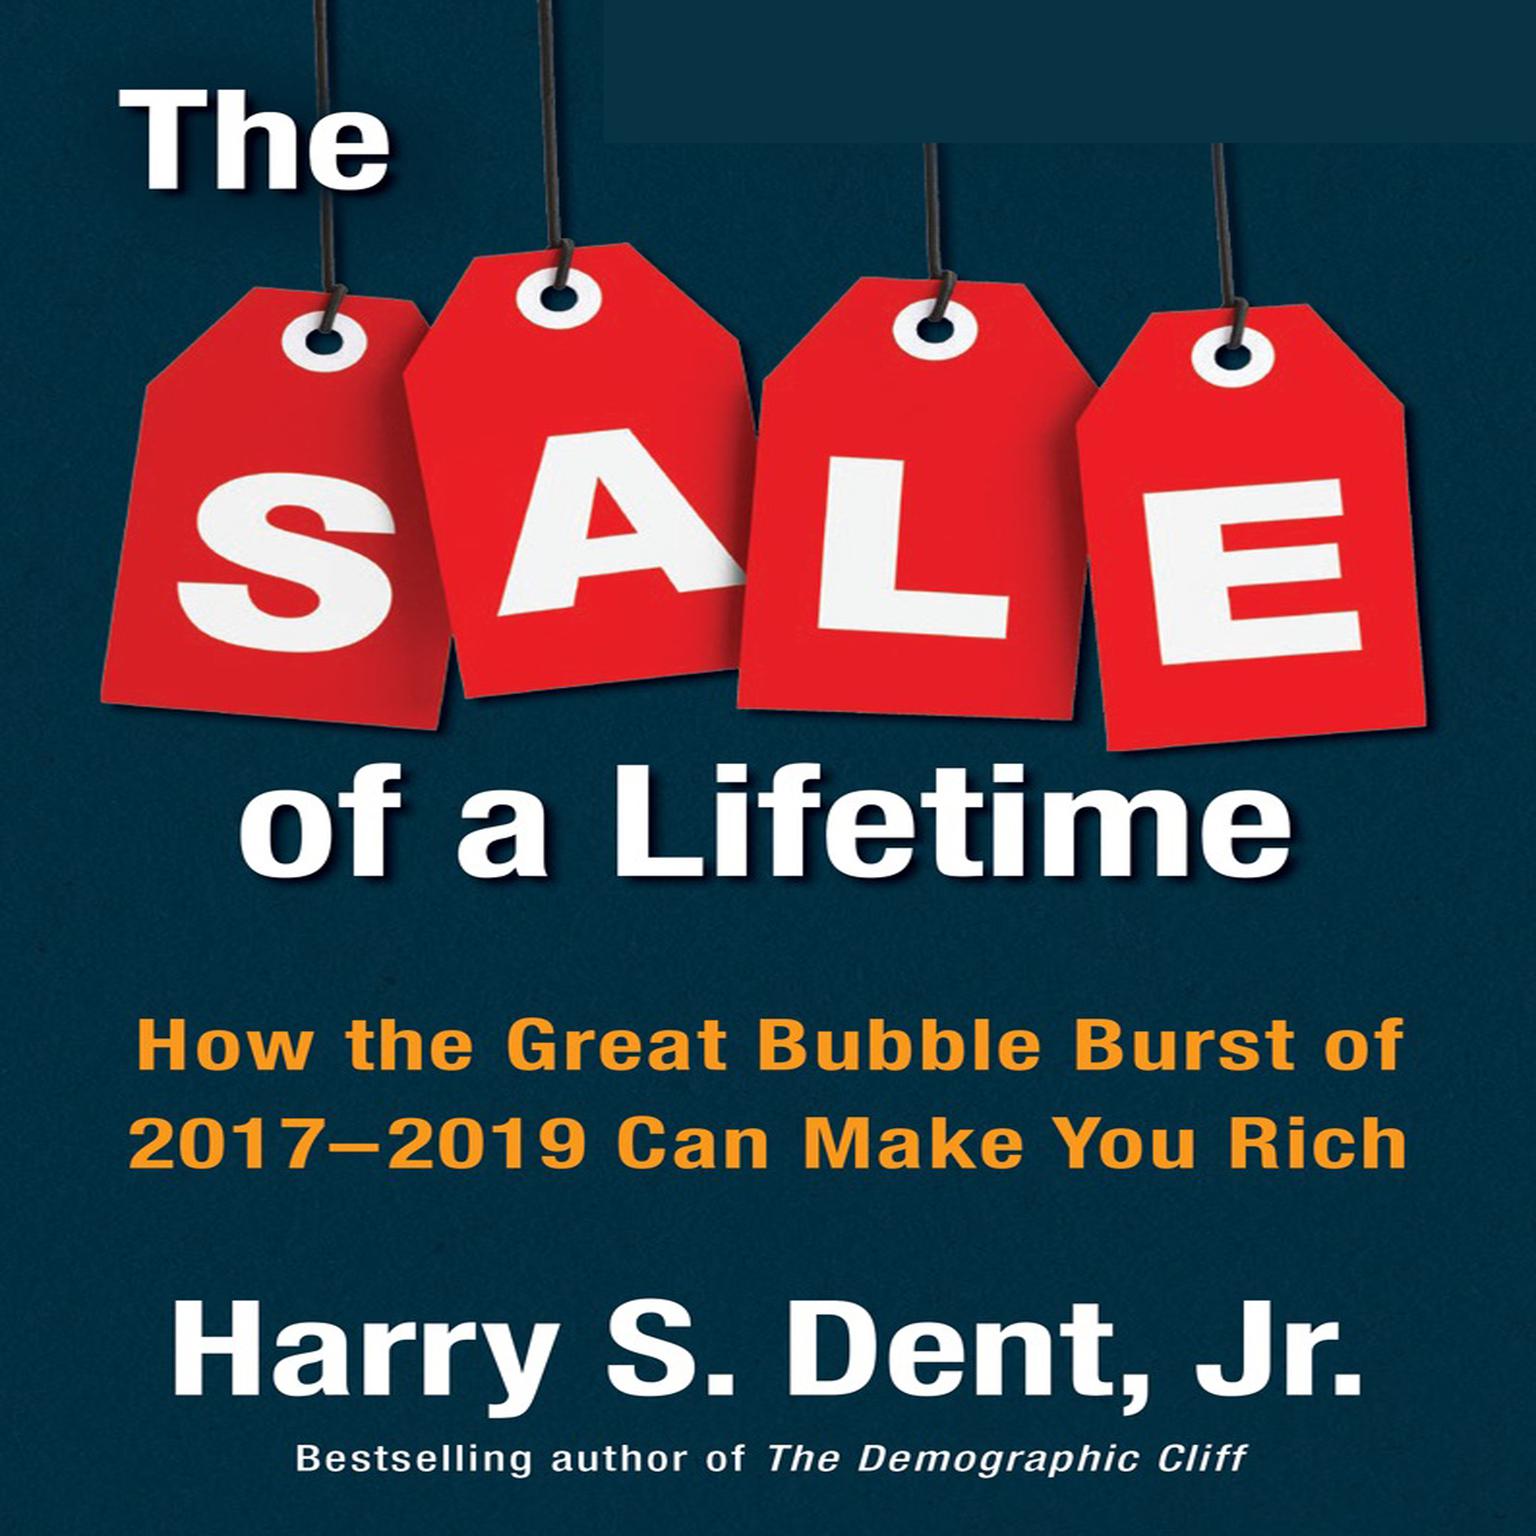 The Sale of a Lifetime: How the Great Bubble Burst of 2017-2019 Can Make You Rich Audiobook, by Harry S. Dent